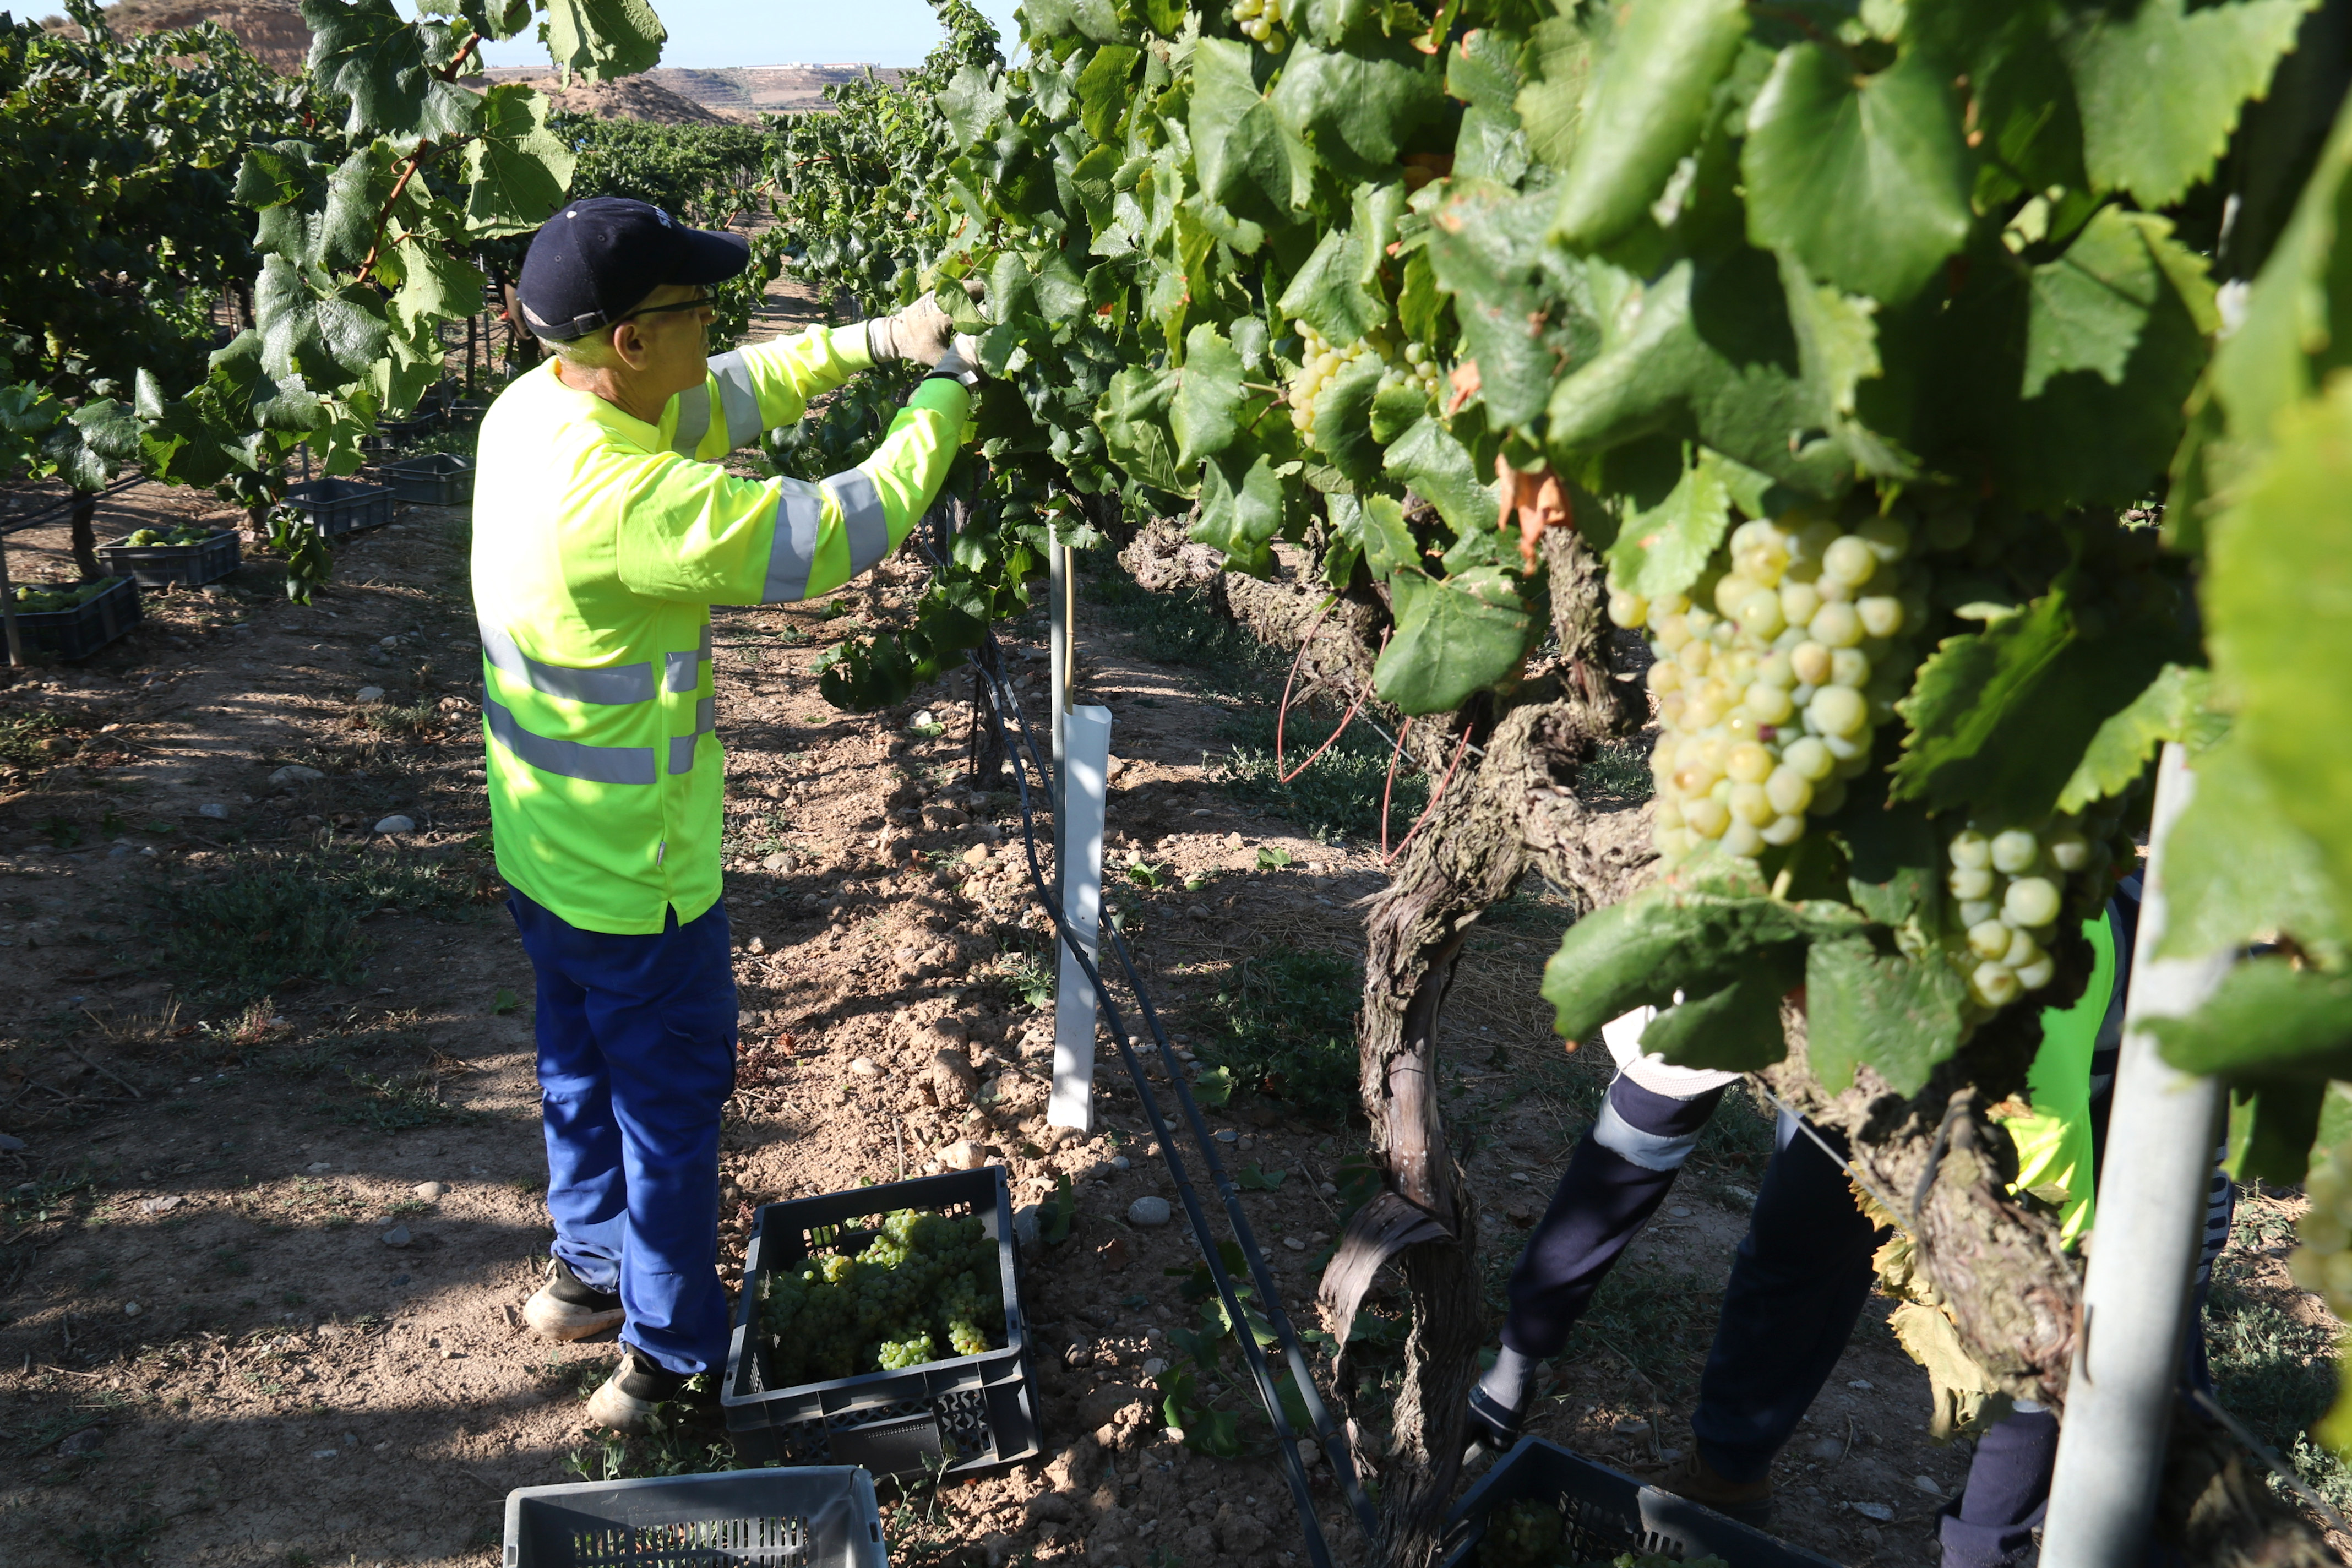 A worker harvesting grapes at one of the Raimat wine grower vineyards